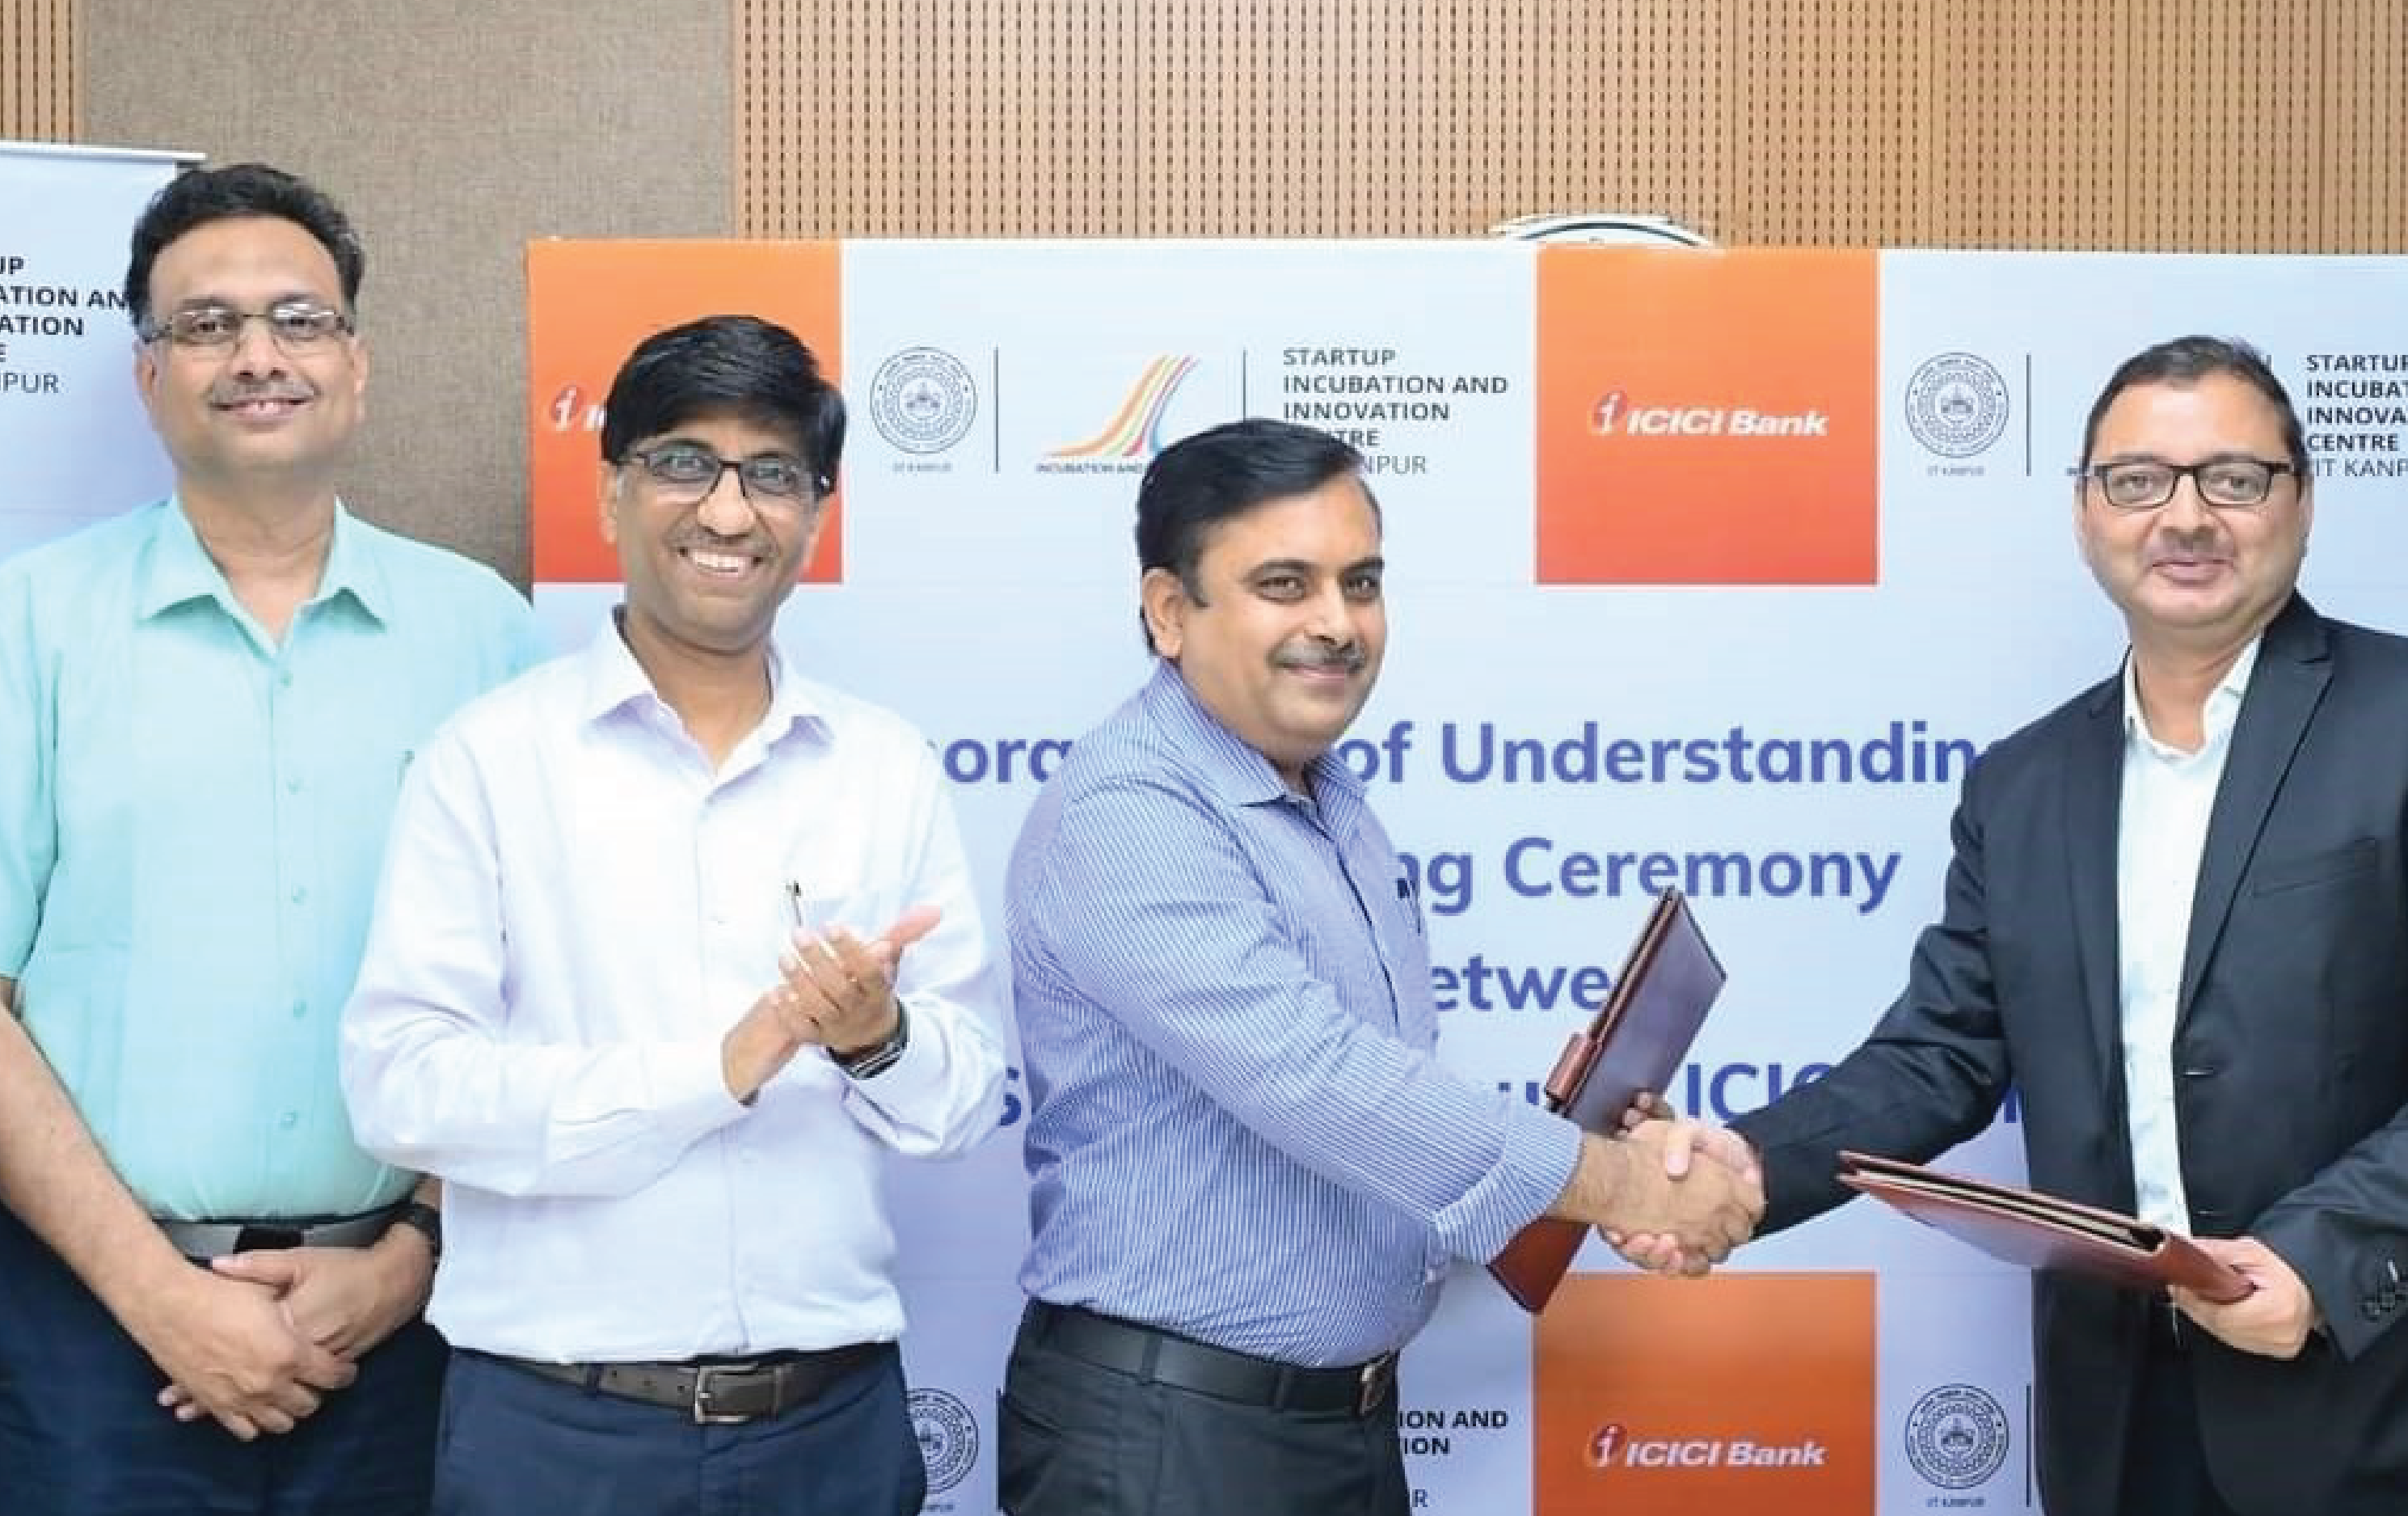 IIT Kanpur ICICI join to fuel startup innovation in India